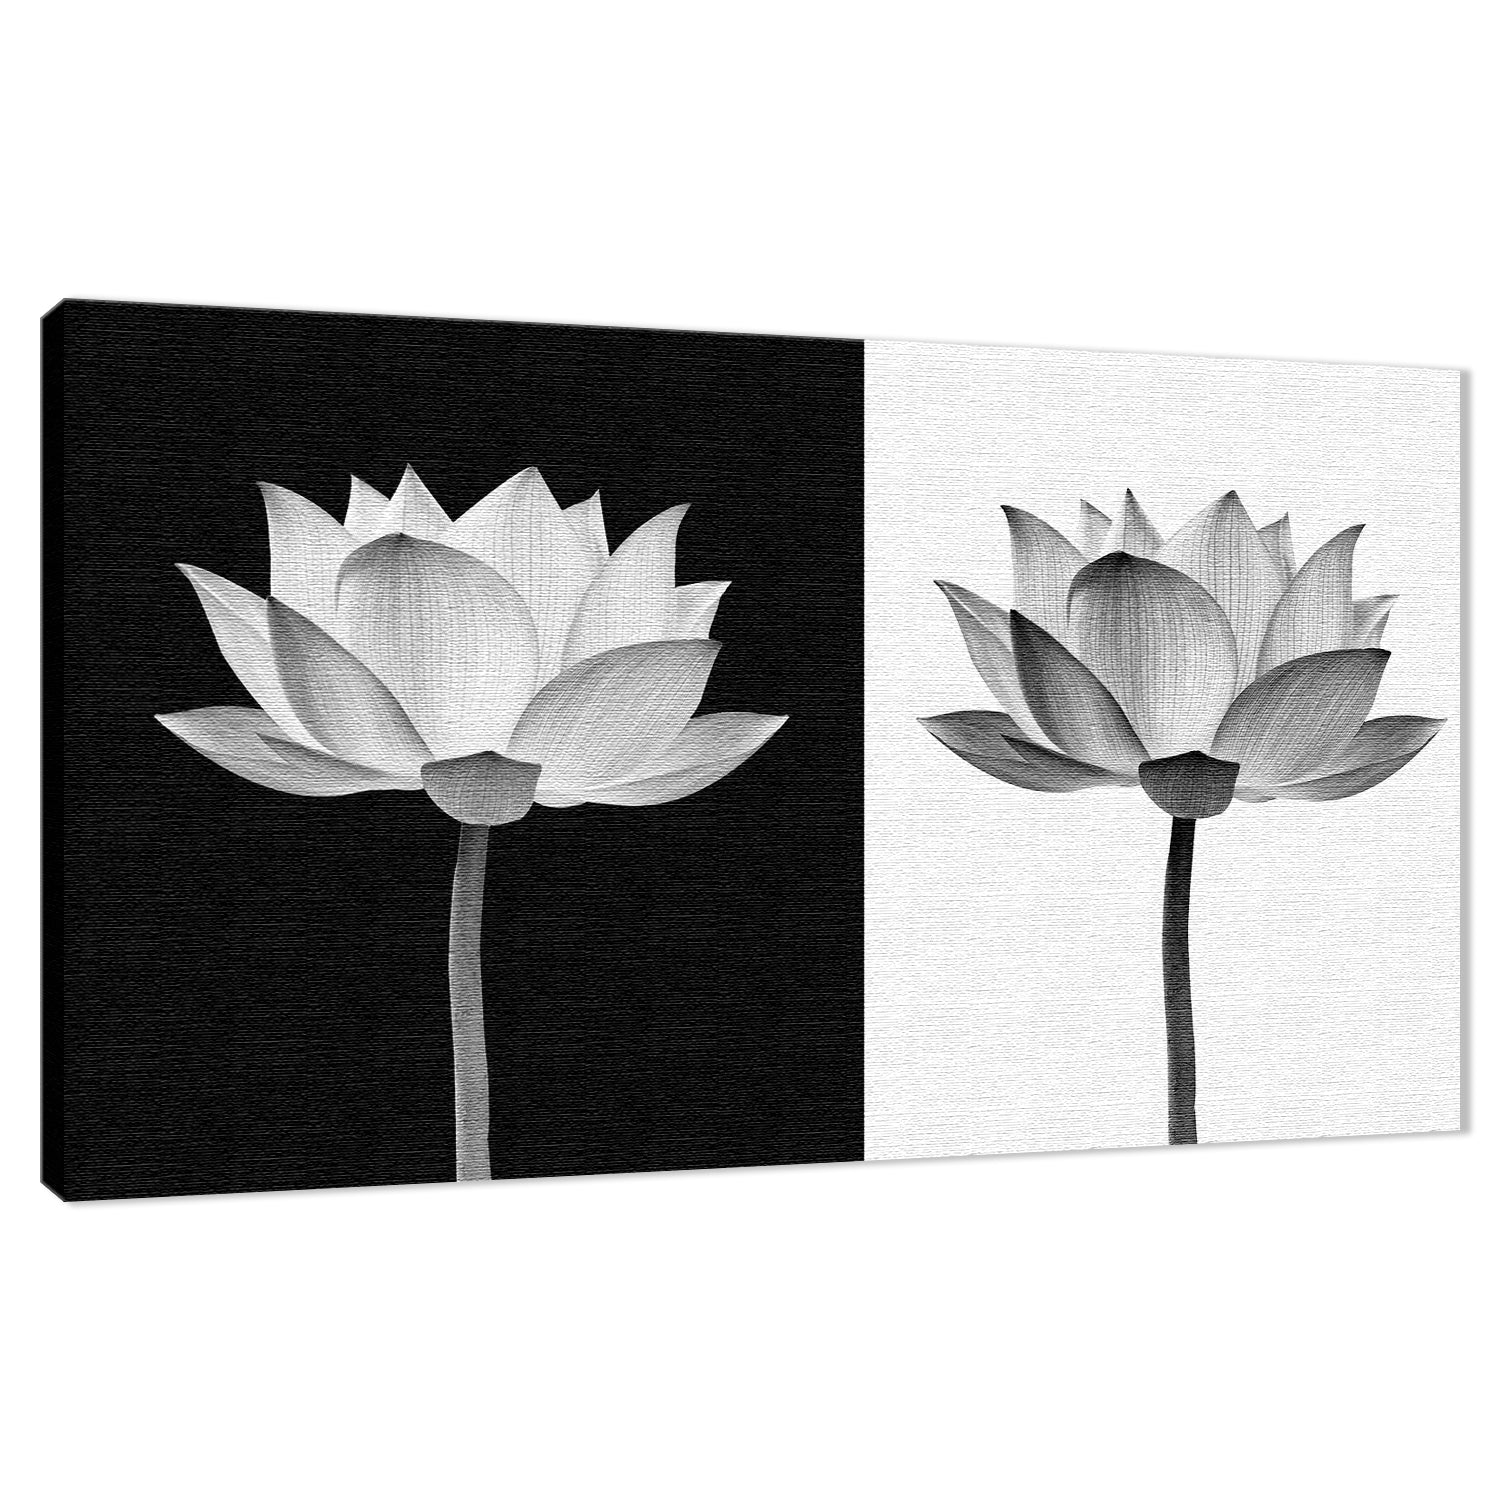 Lotus Flower on Black and White Background Floral Nature Photo Fine Art Canvas Print  - PIPAFINEART